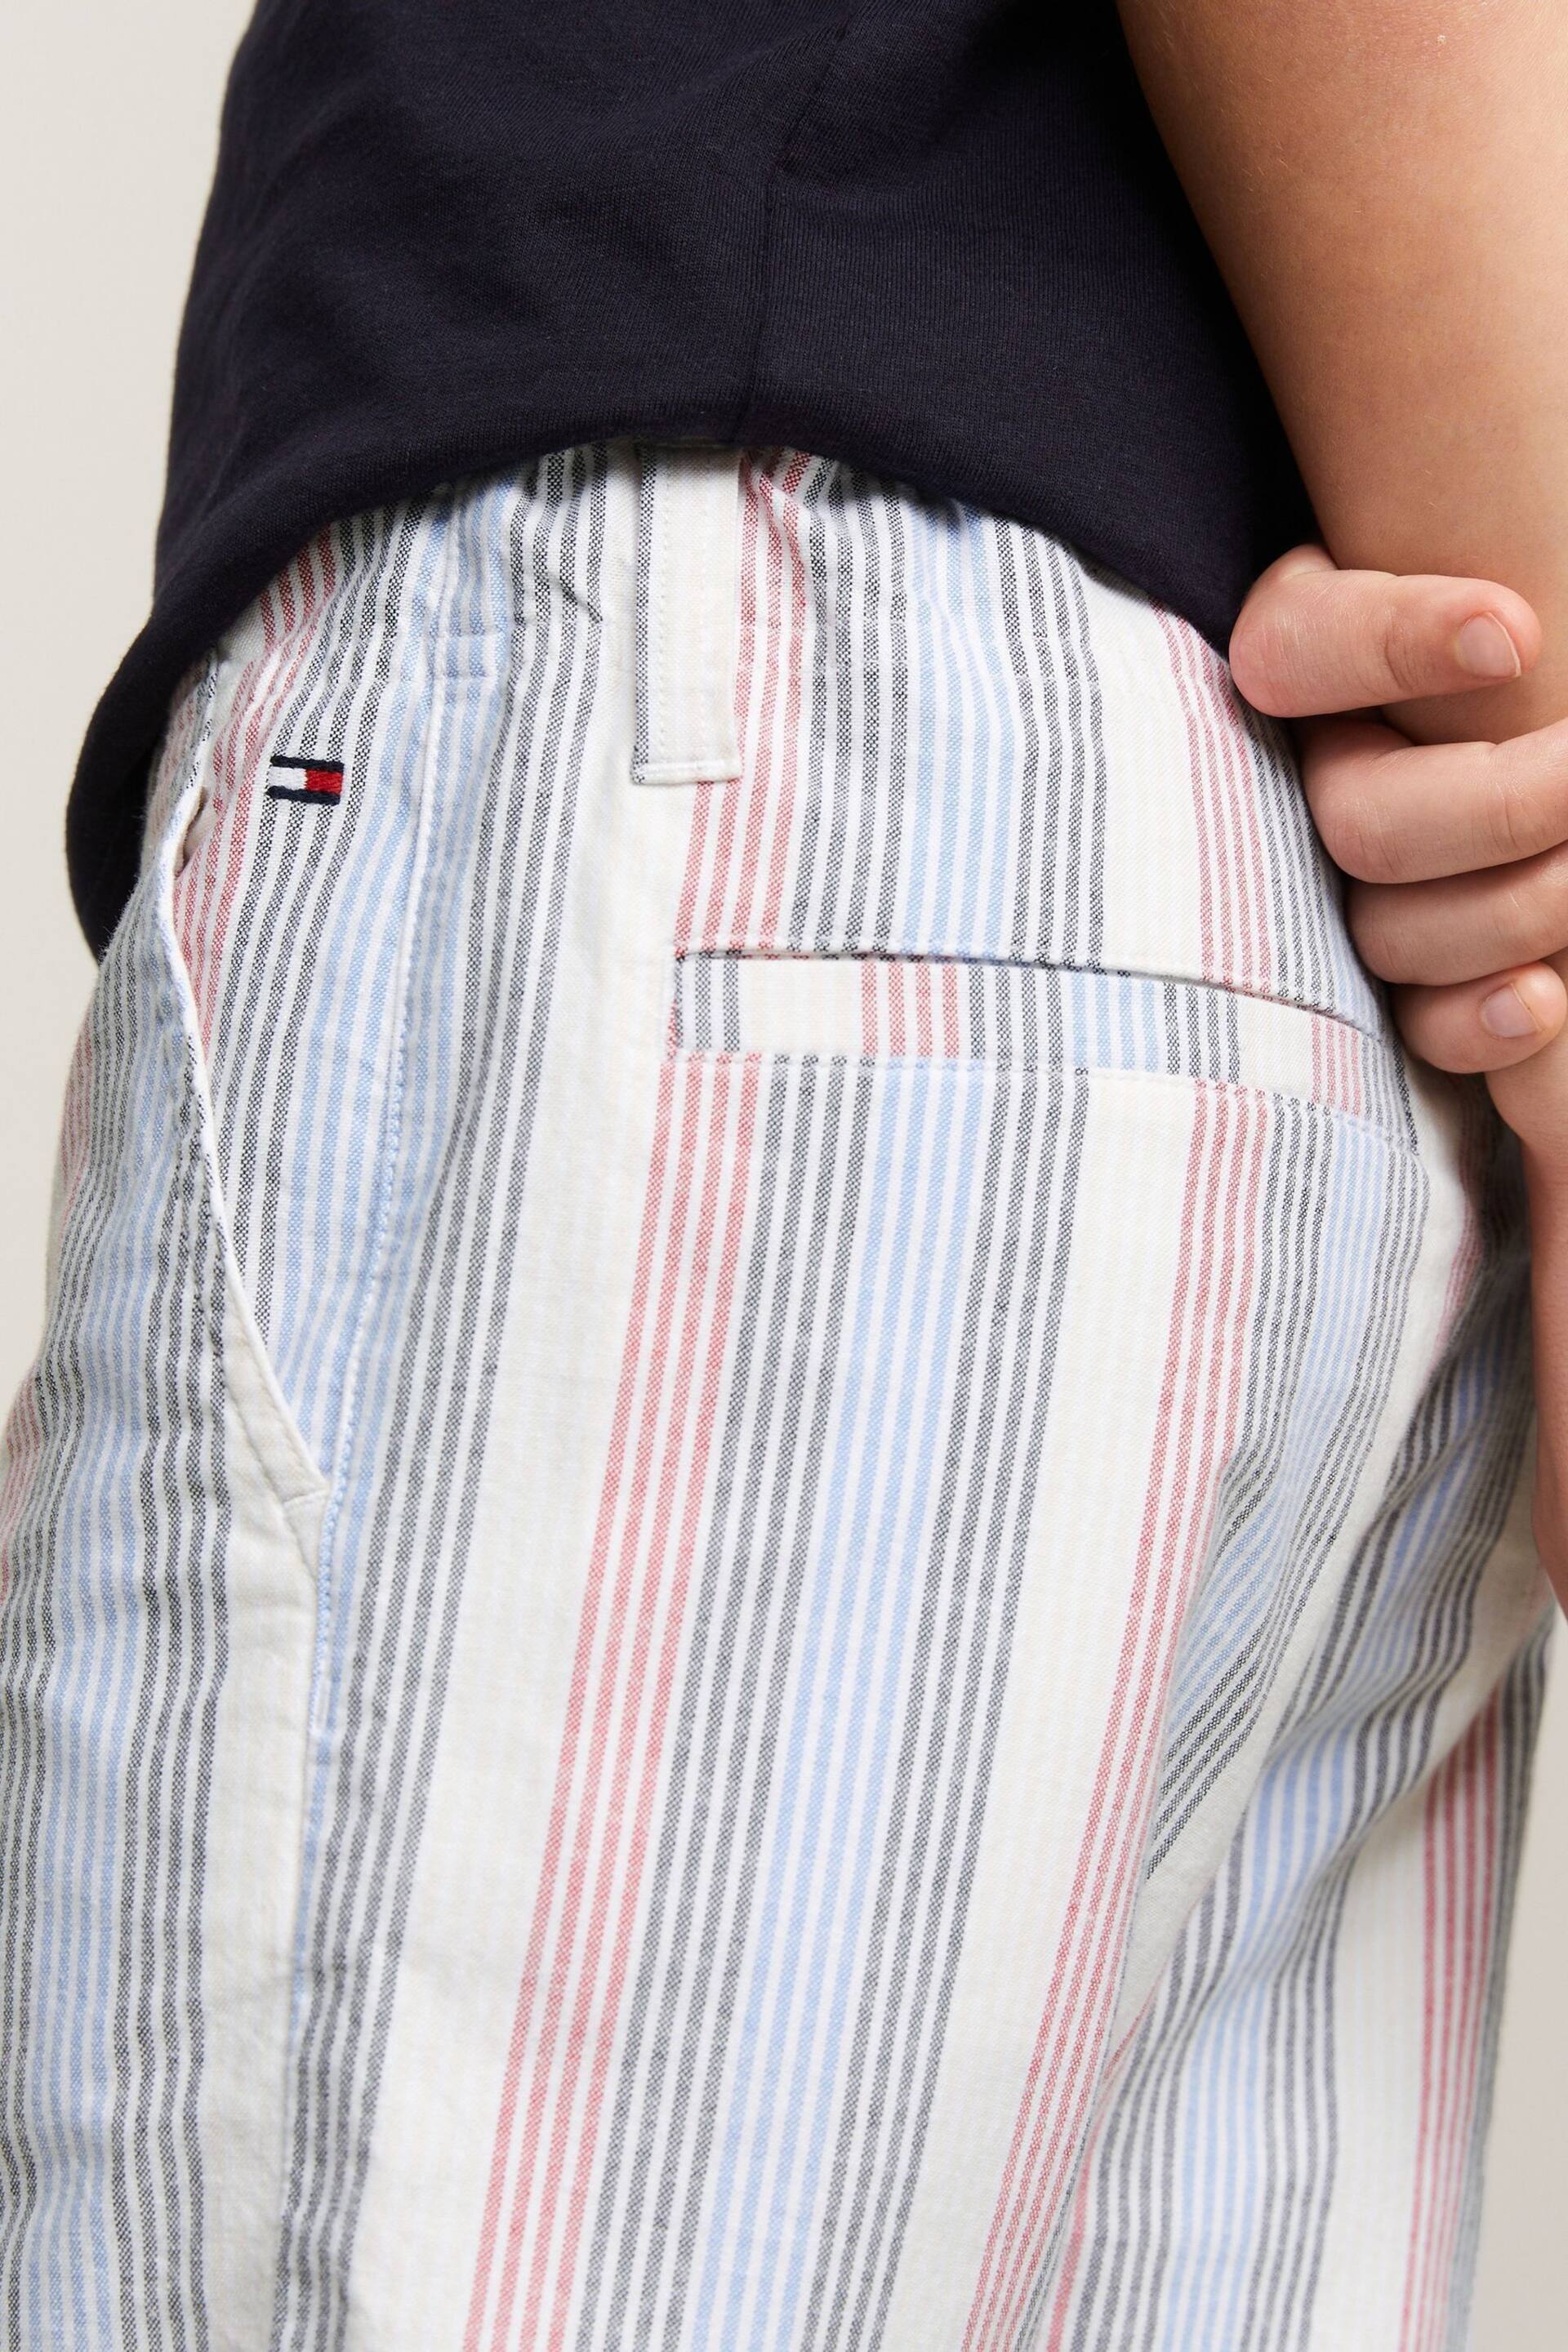 Tommy Hilfiger Cream Oxford Striped Shorts - Image 4 of 5